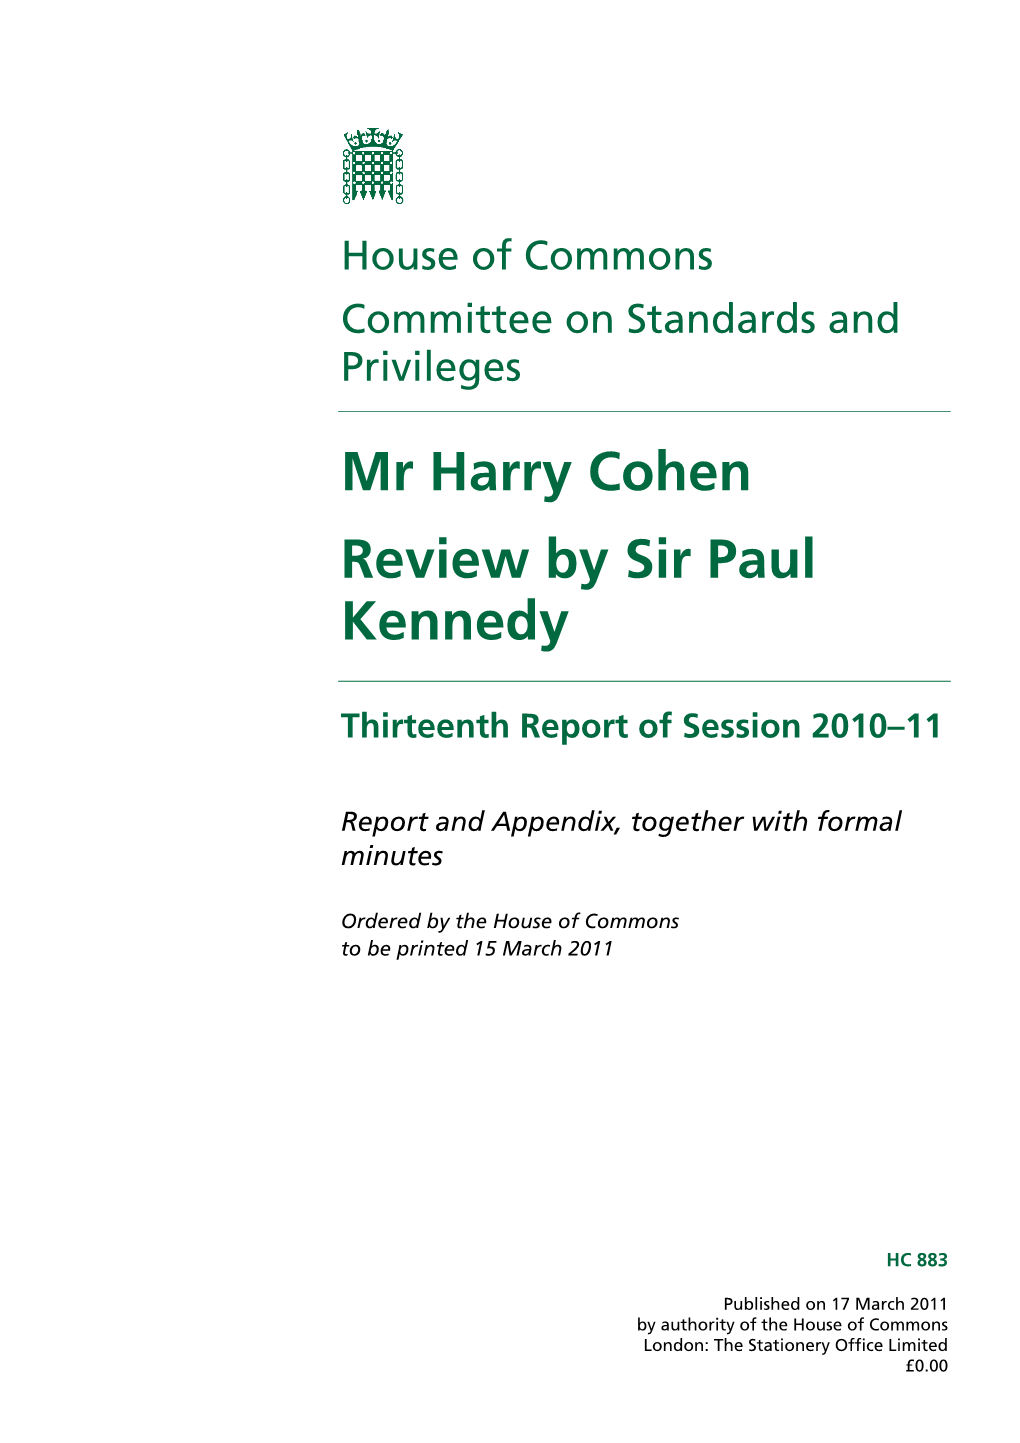 Mr Harry Cohen Review by Sir Paul Kennedy